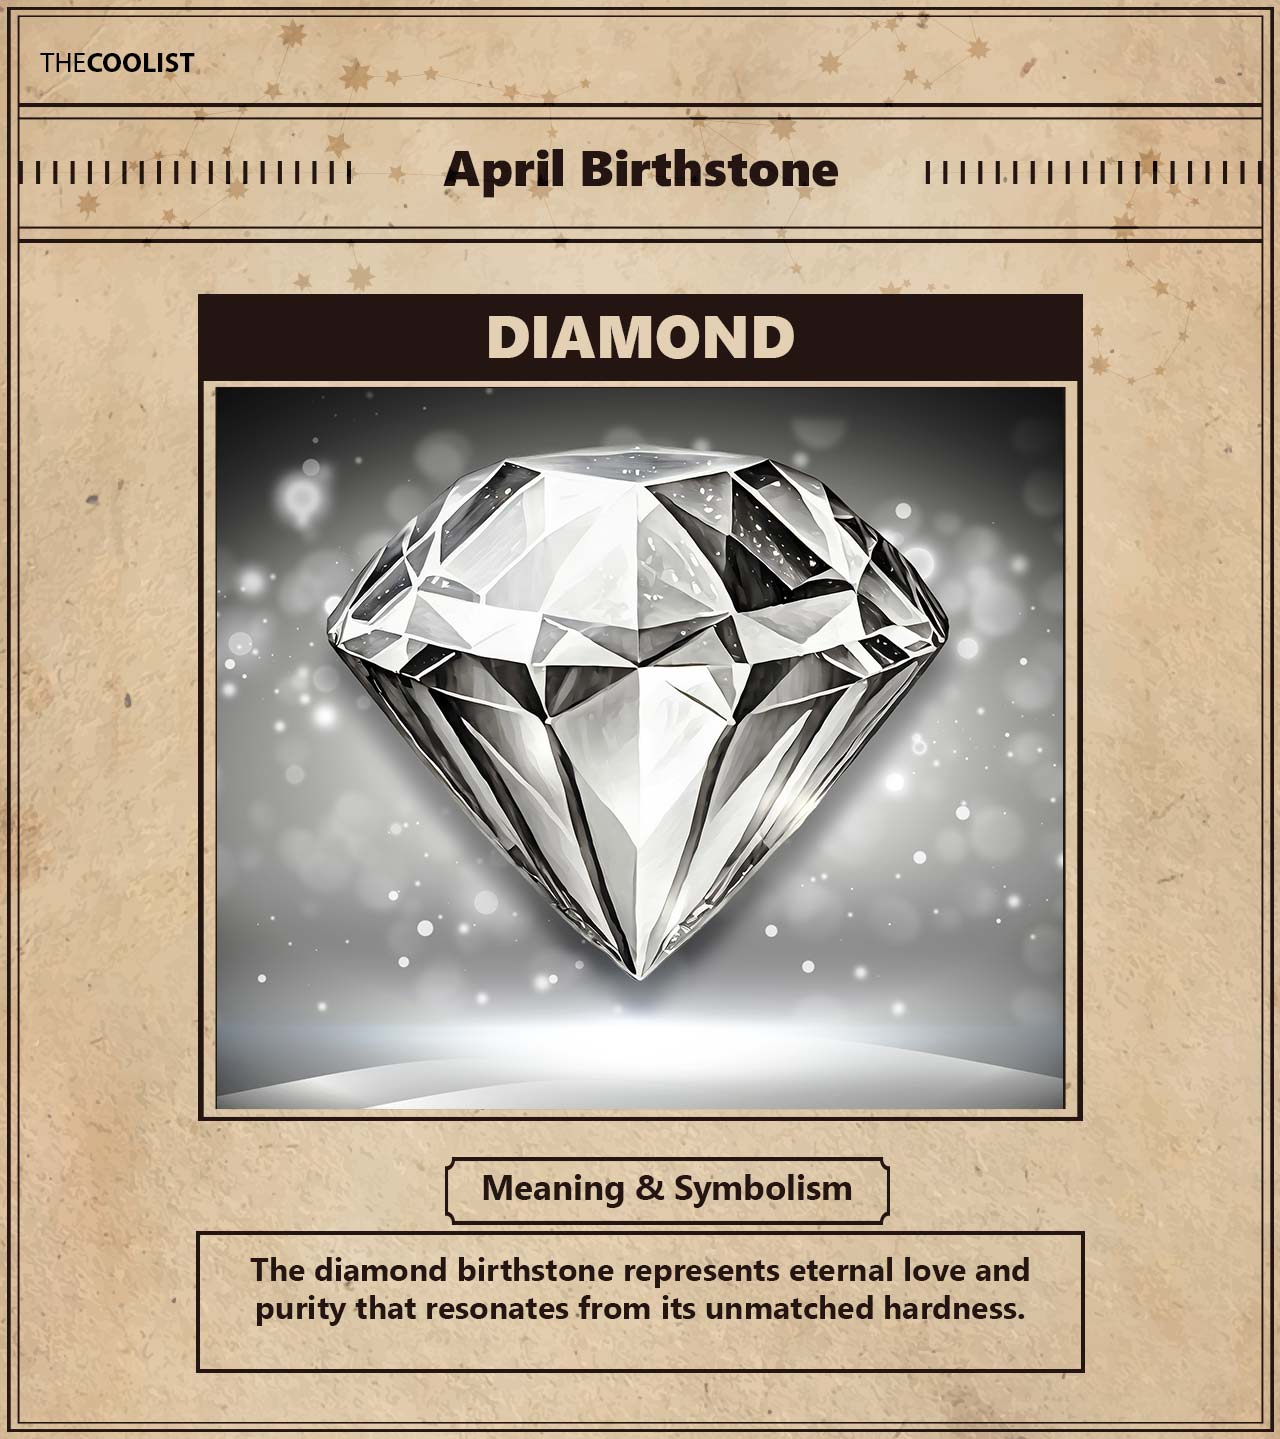 Infographic for the April birthstone